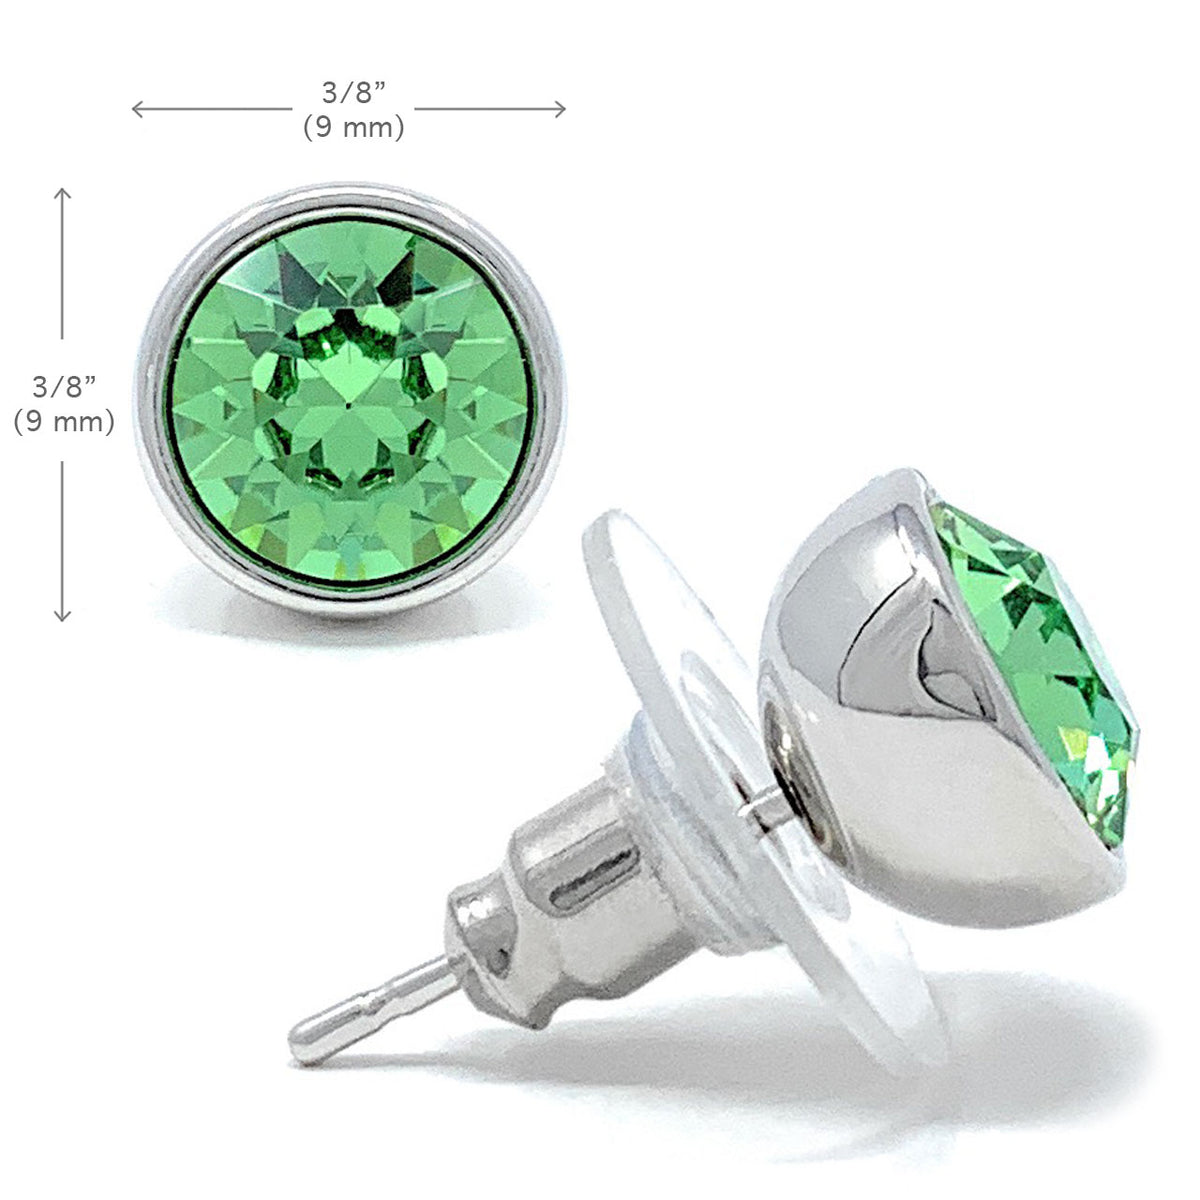 Harley Stud Earrings with Green Peridot Round Crystals from Swarovski Silver Toned Rhodium Plated - Ed Heart